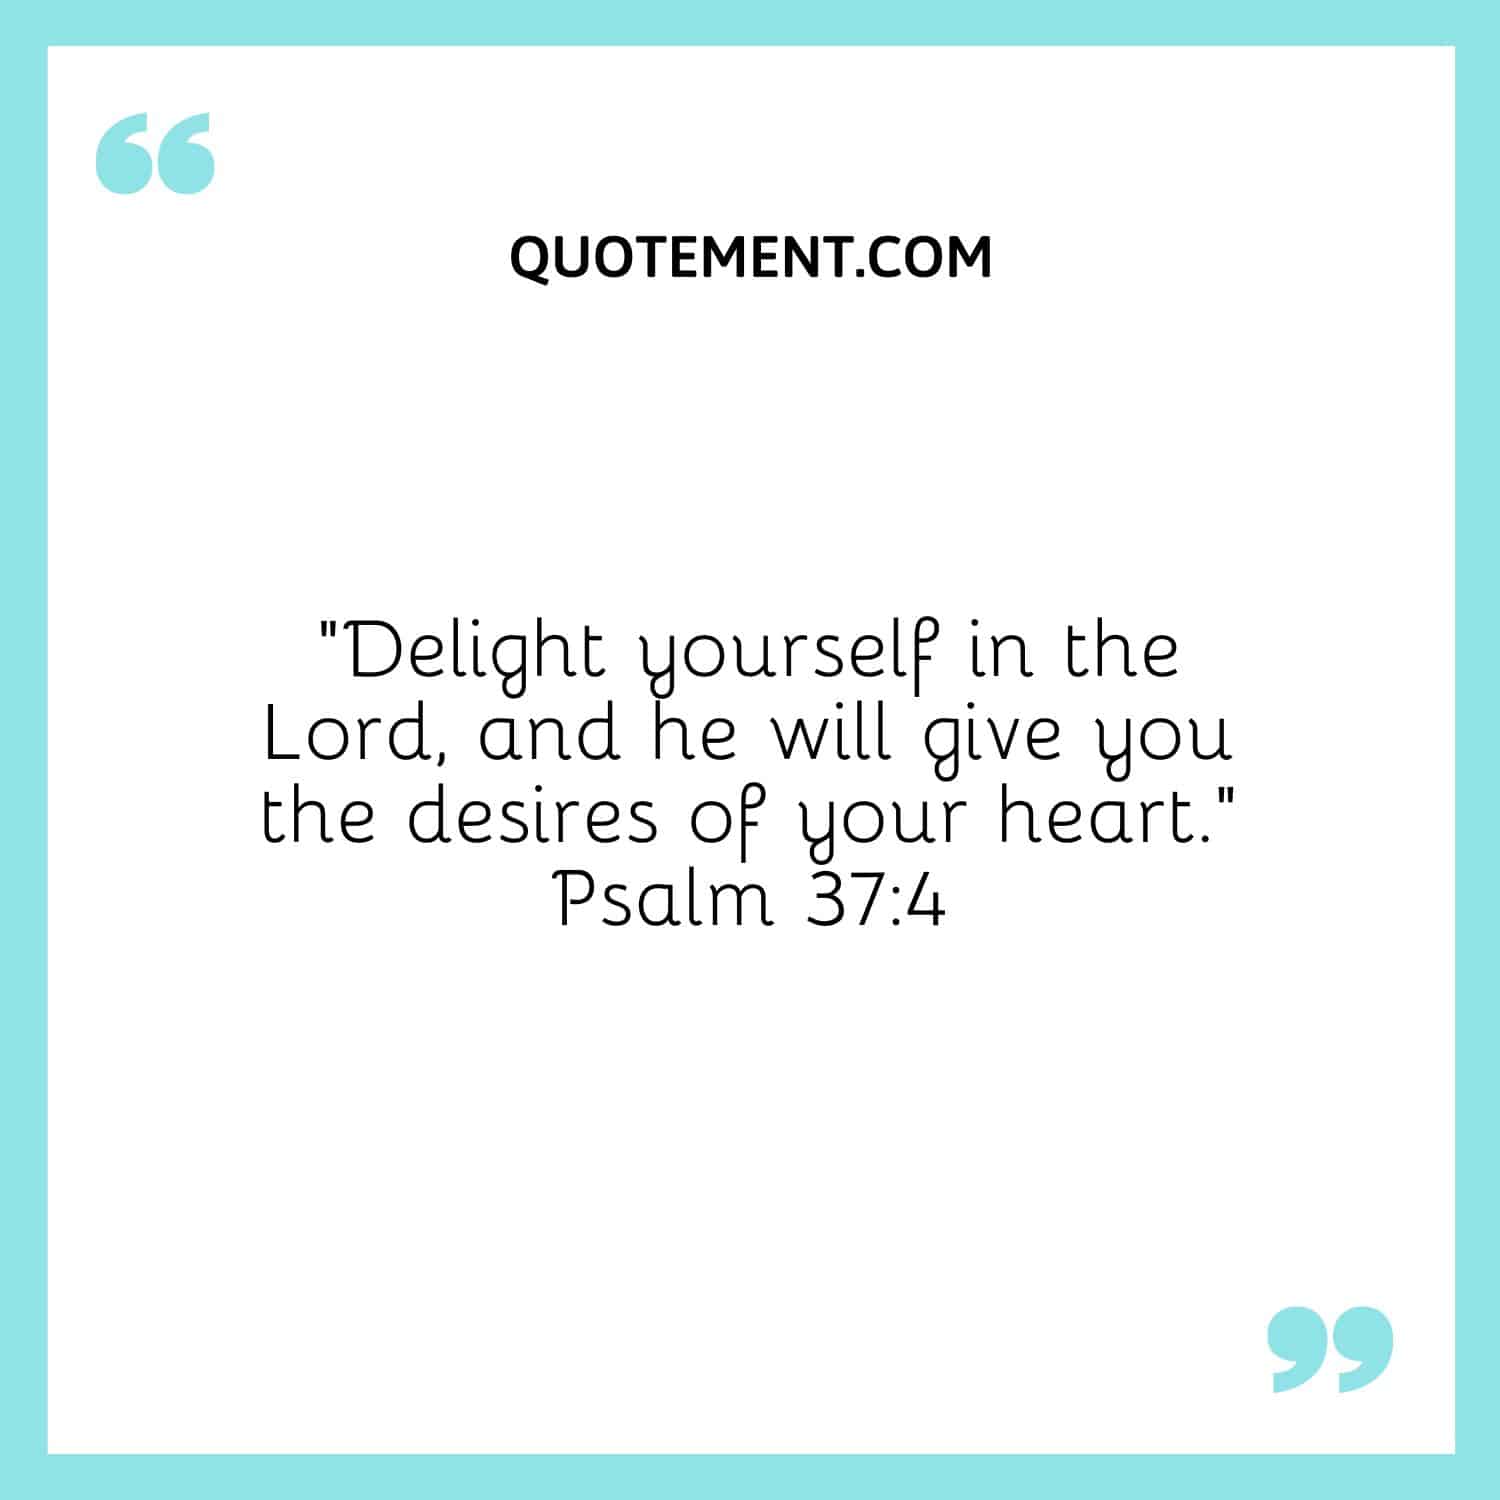 “Delight yourself in the Lord, and he will give you the desires of your heart.” Psalm 374